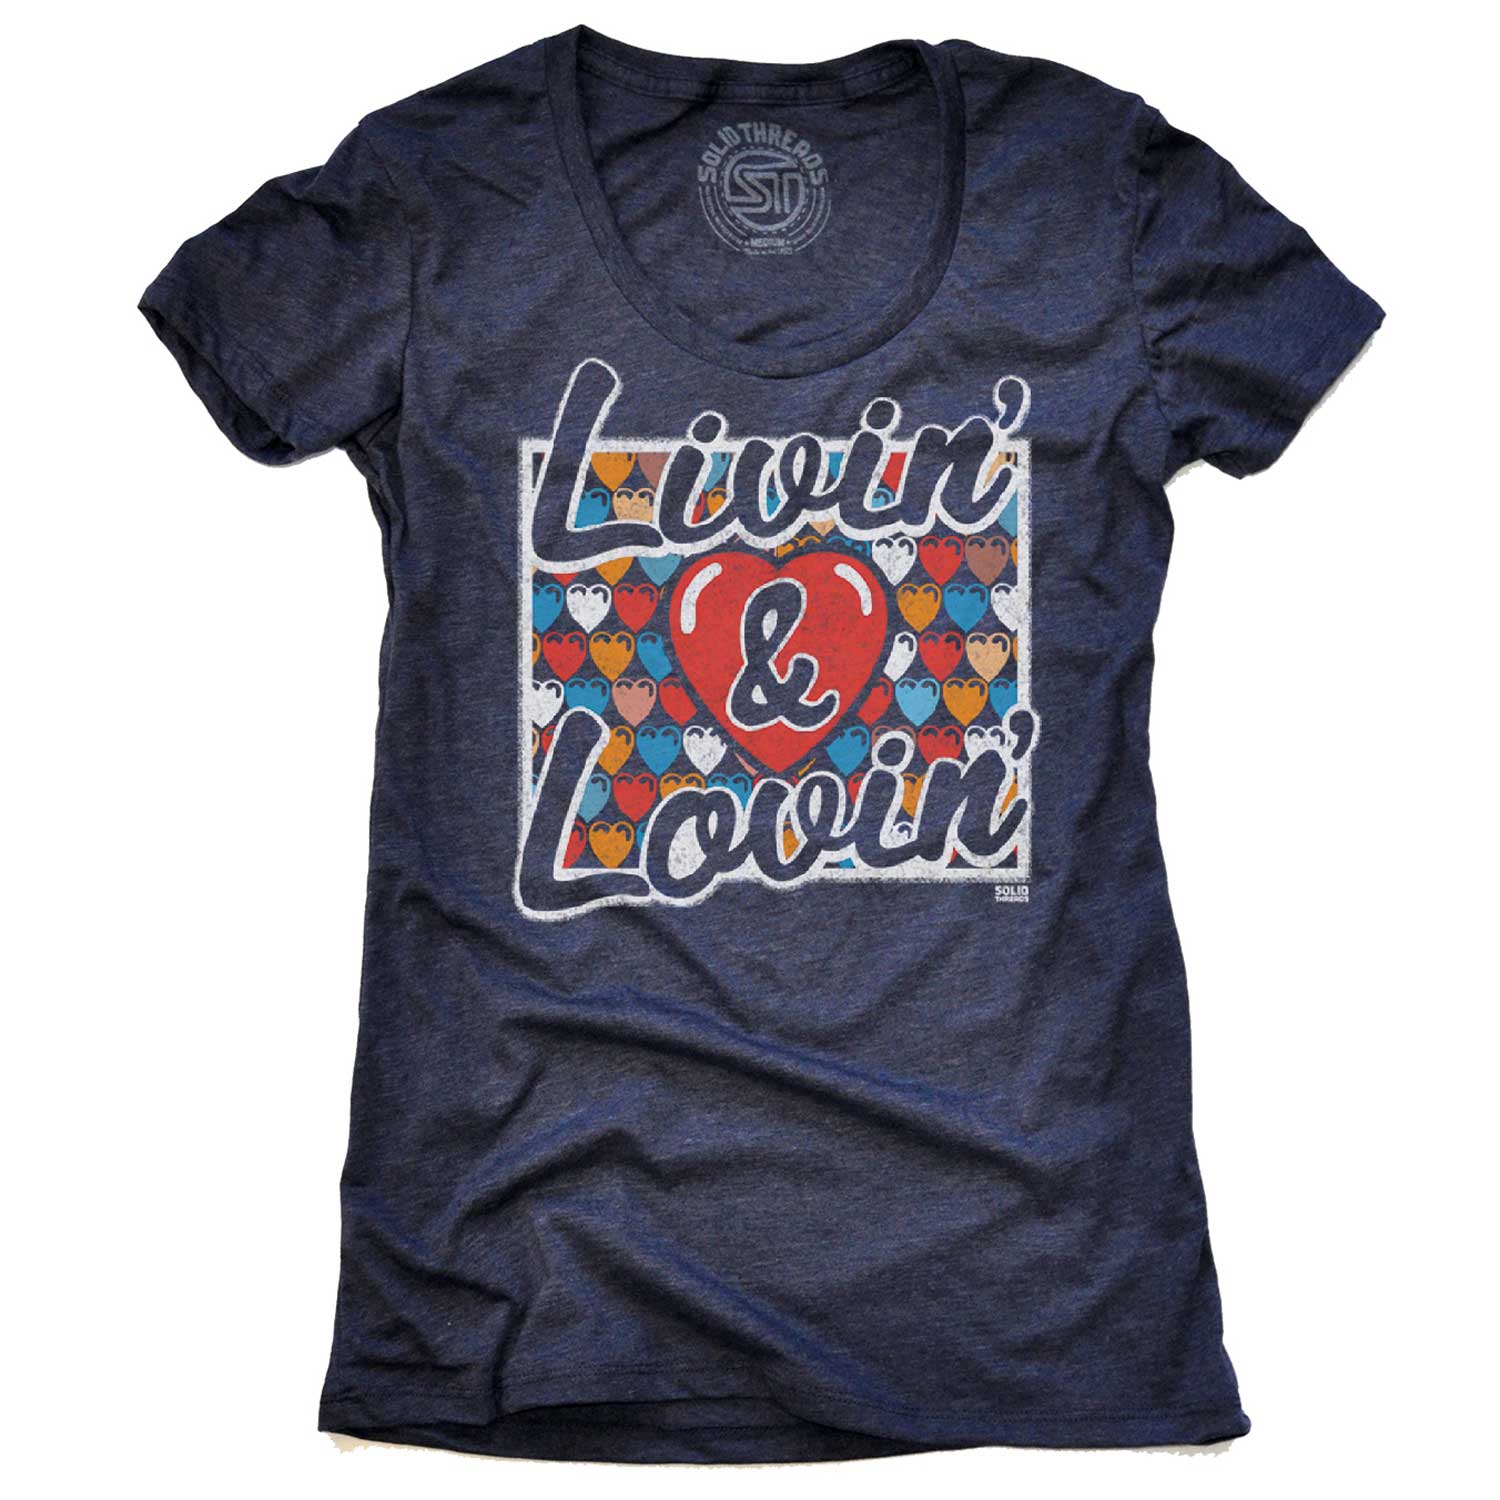 Women's Livin & Lovin Vintage Graphic Tee | Cool Tom Petty T-shirt for Women | Solid Threads